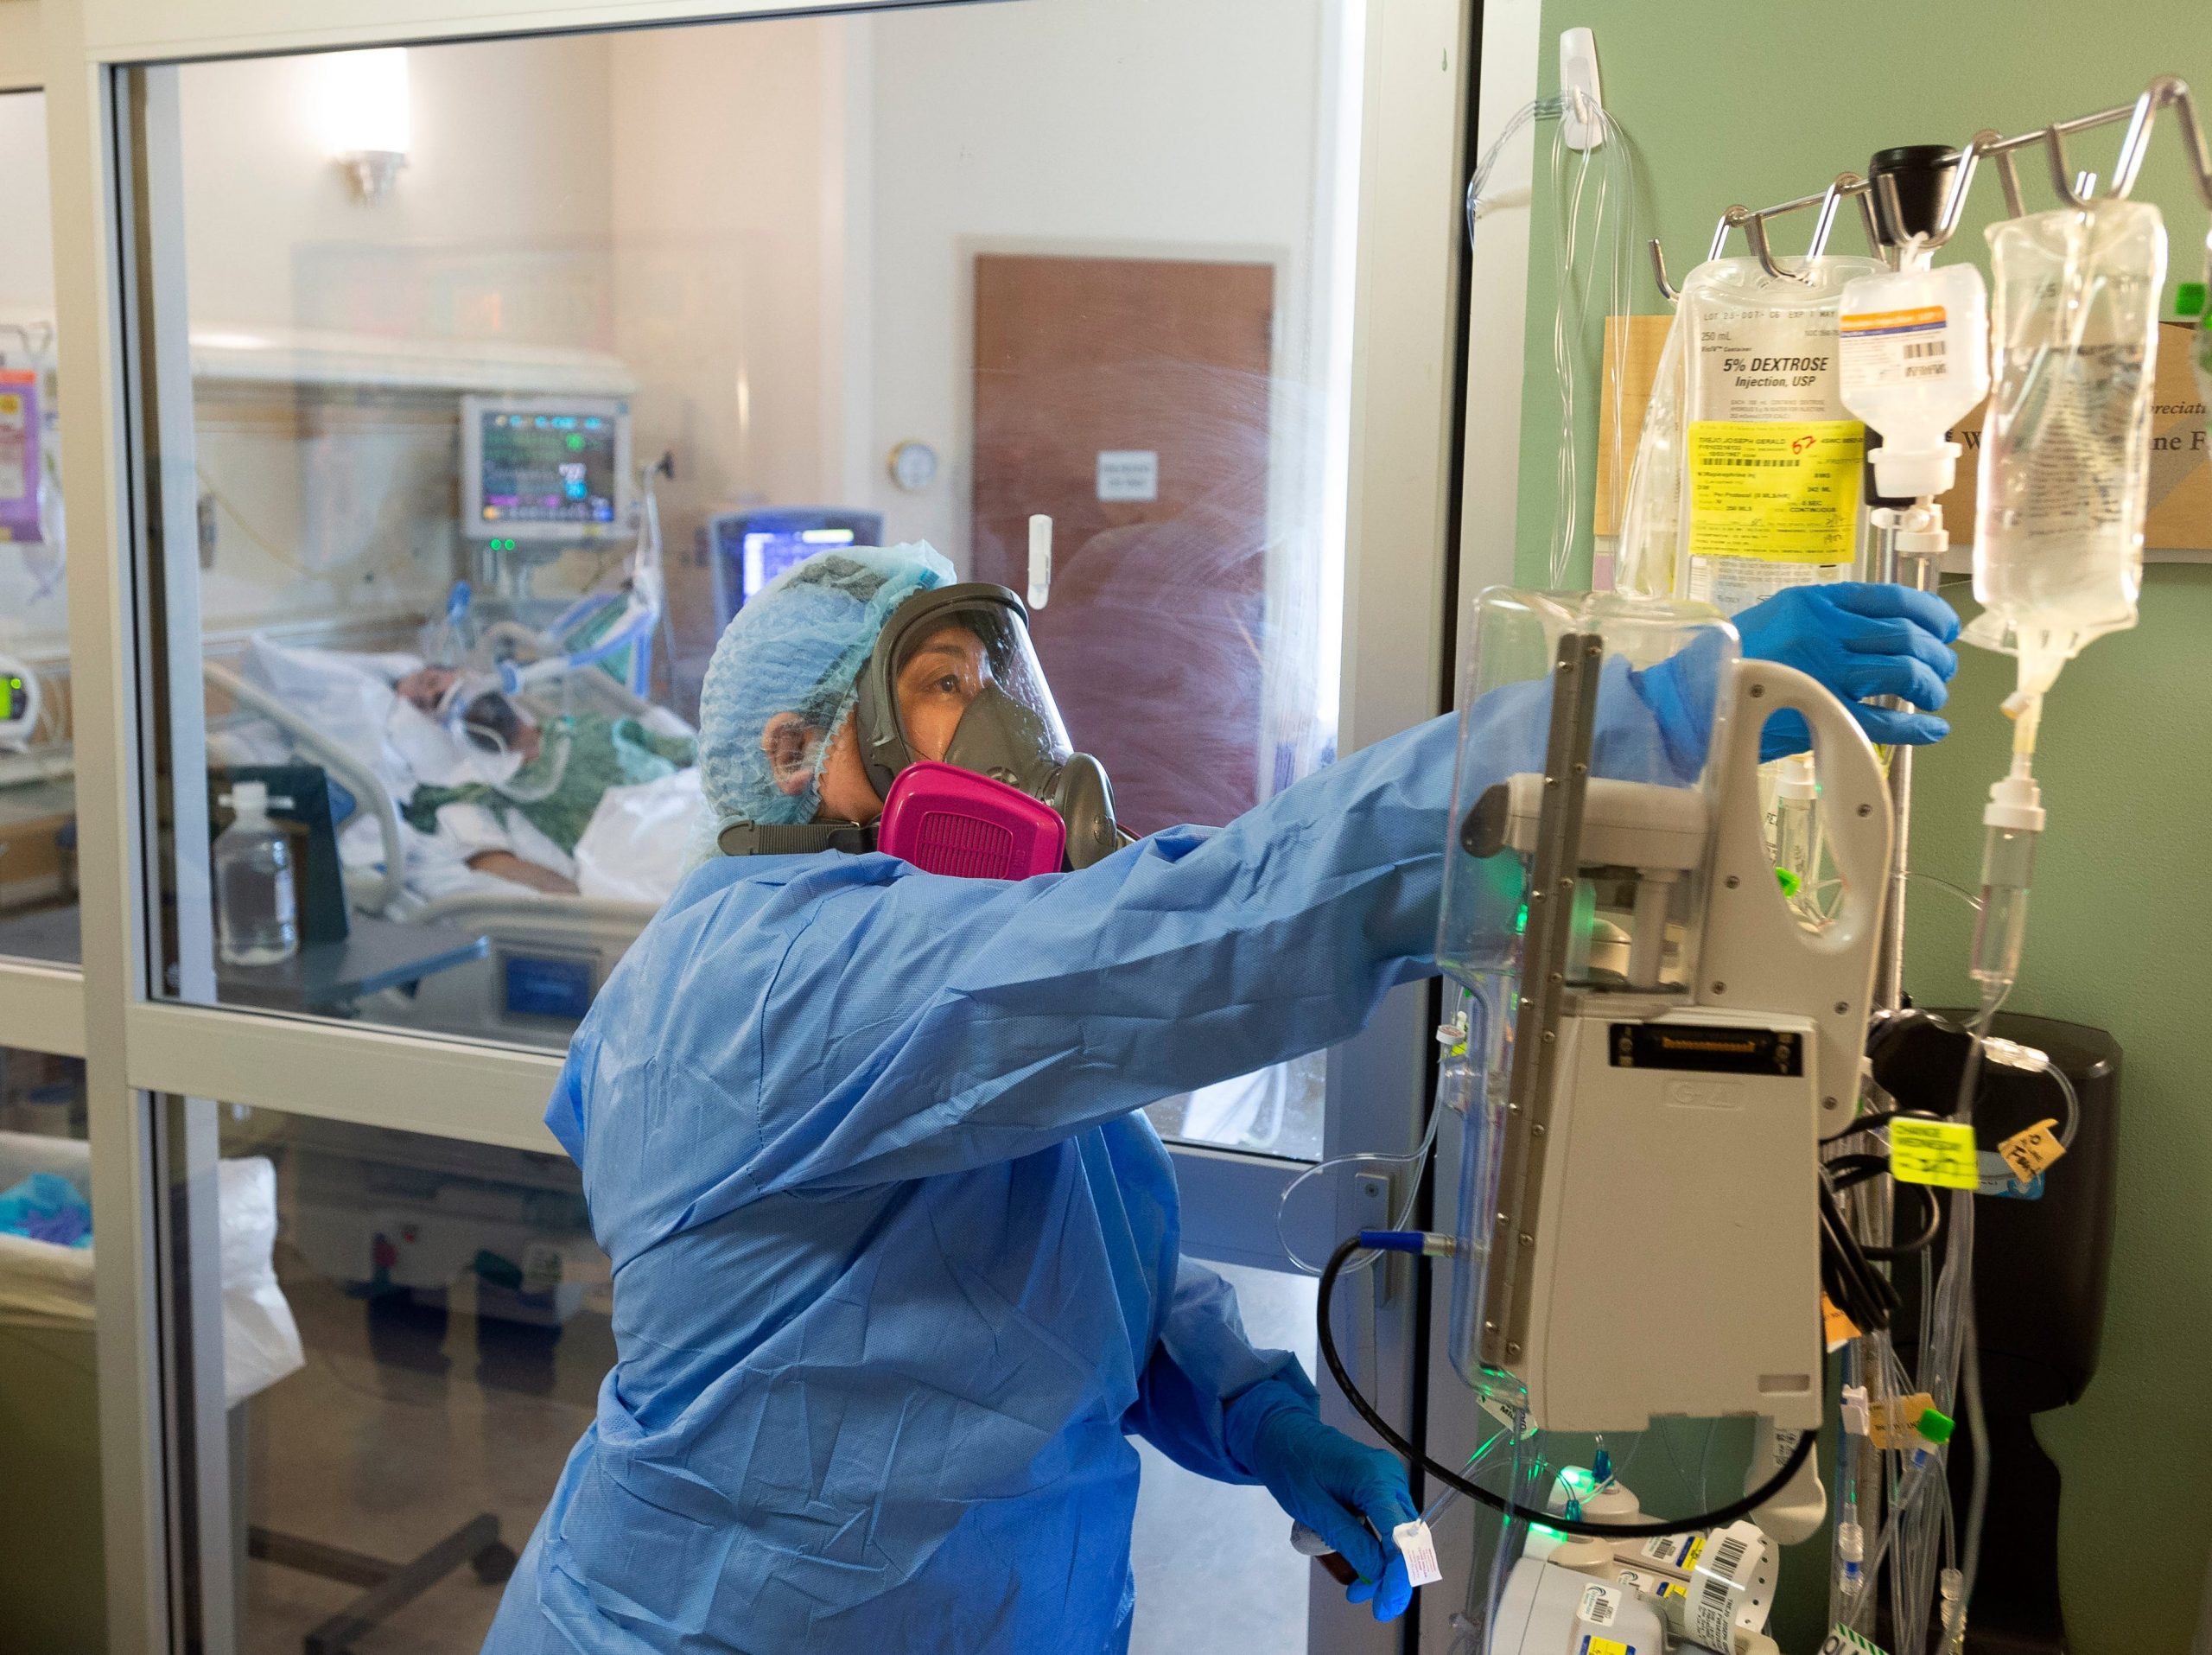 A nurse dressed in PPE tends to medical equipment in a hospital